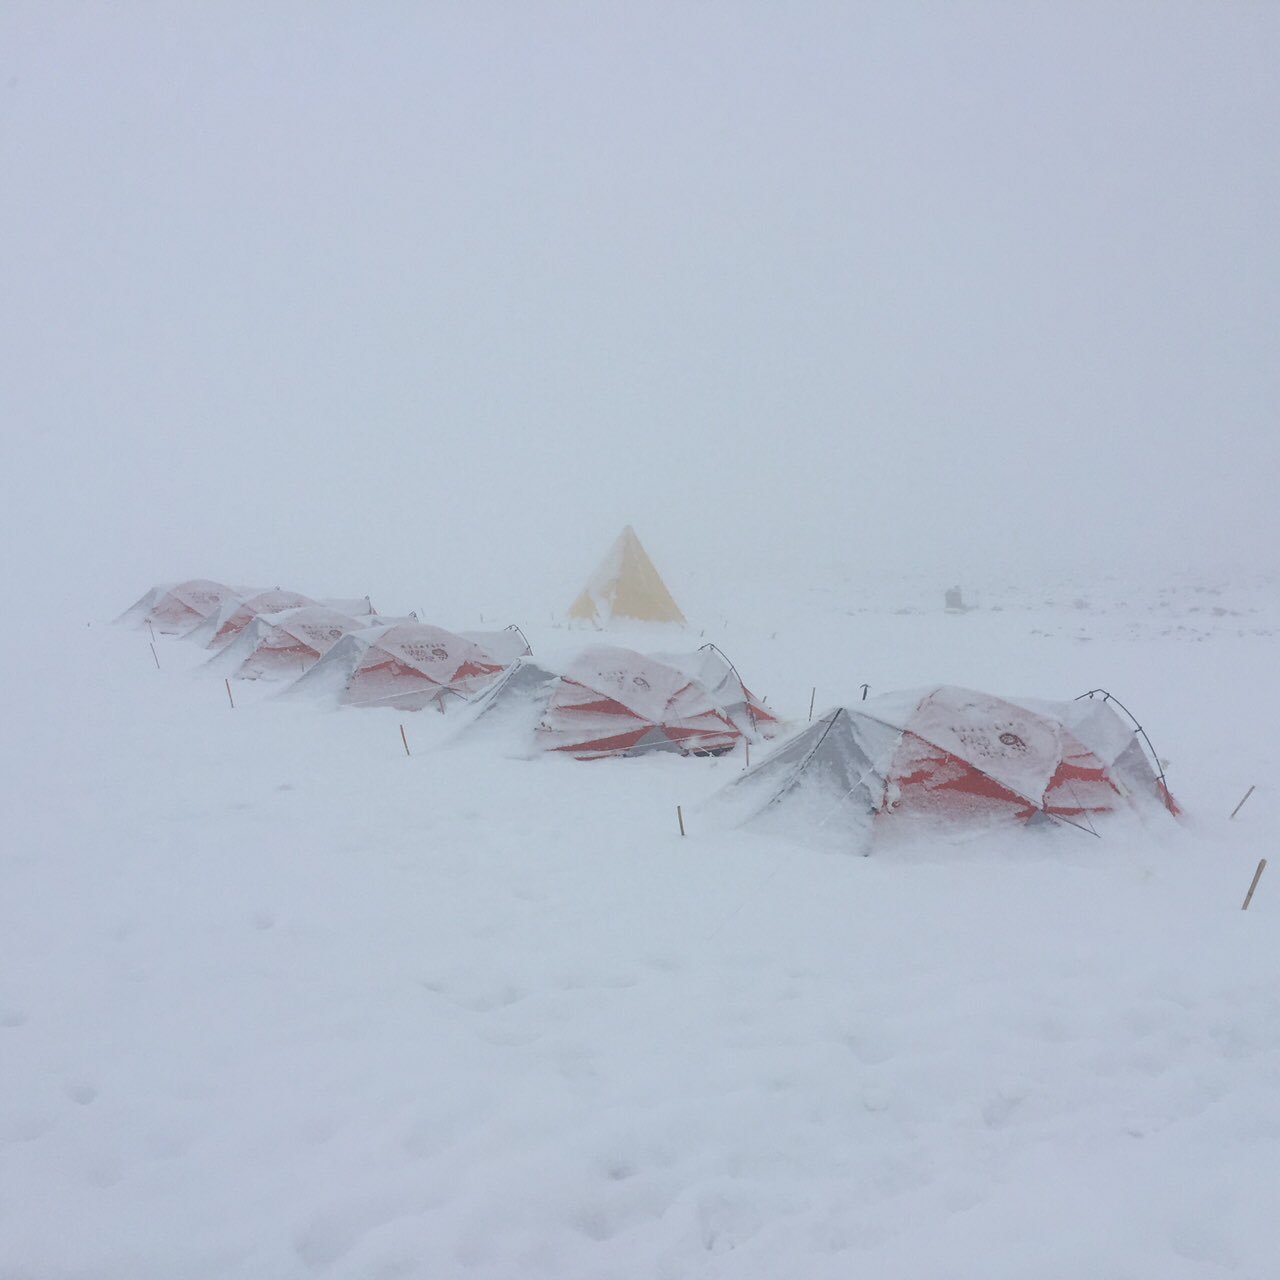 klauw Rekwisieten Baan Neil Shubin on Twitter: "New Year's 2017, Antarctica. Outside the tent: a  huge blizzard. Inside the tent: I baked a chocolate chip pound cake, of  course. https://t.co/sGAEE1O9Ro" / Twitter